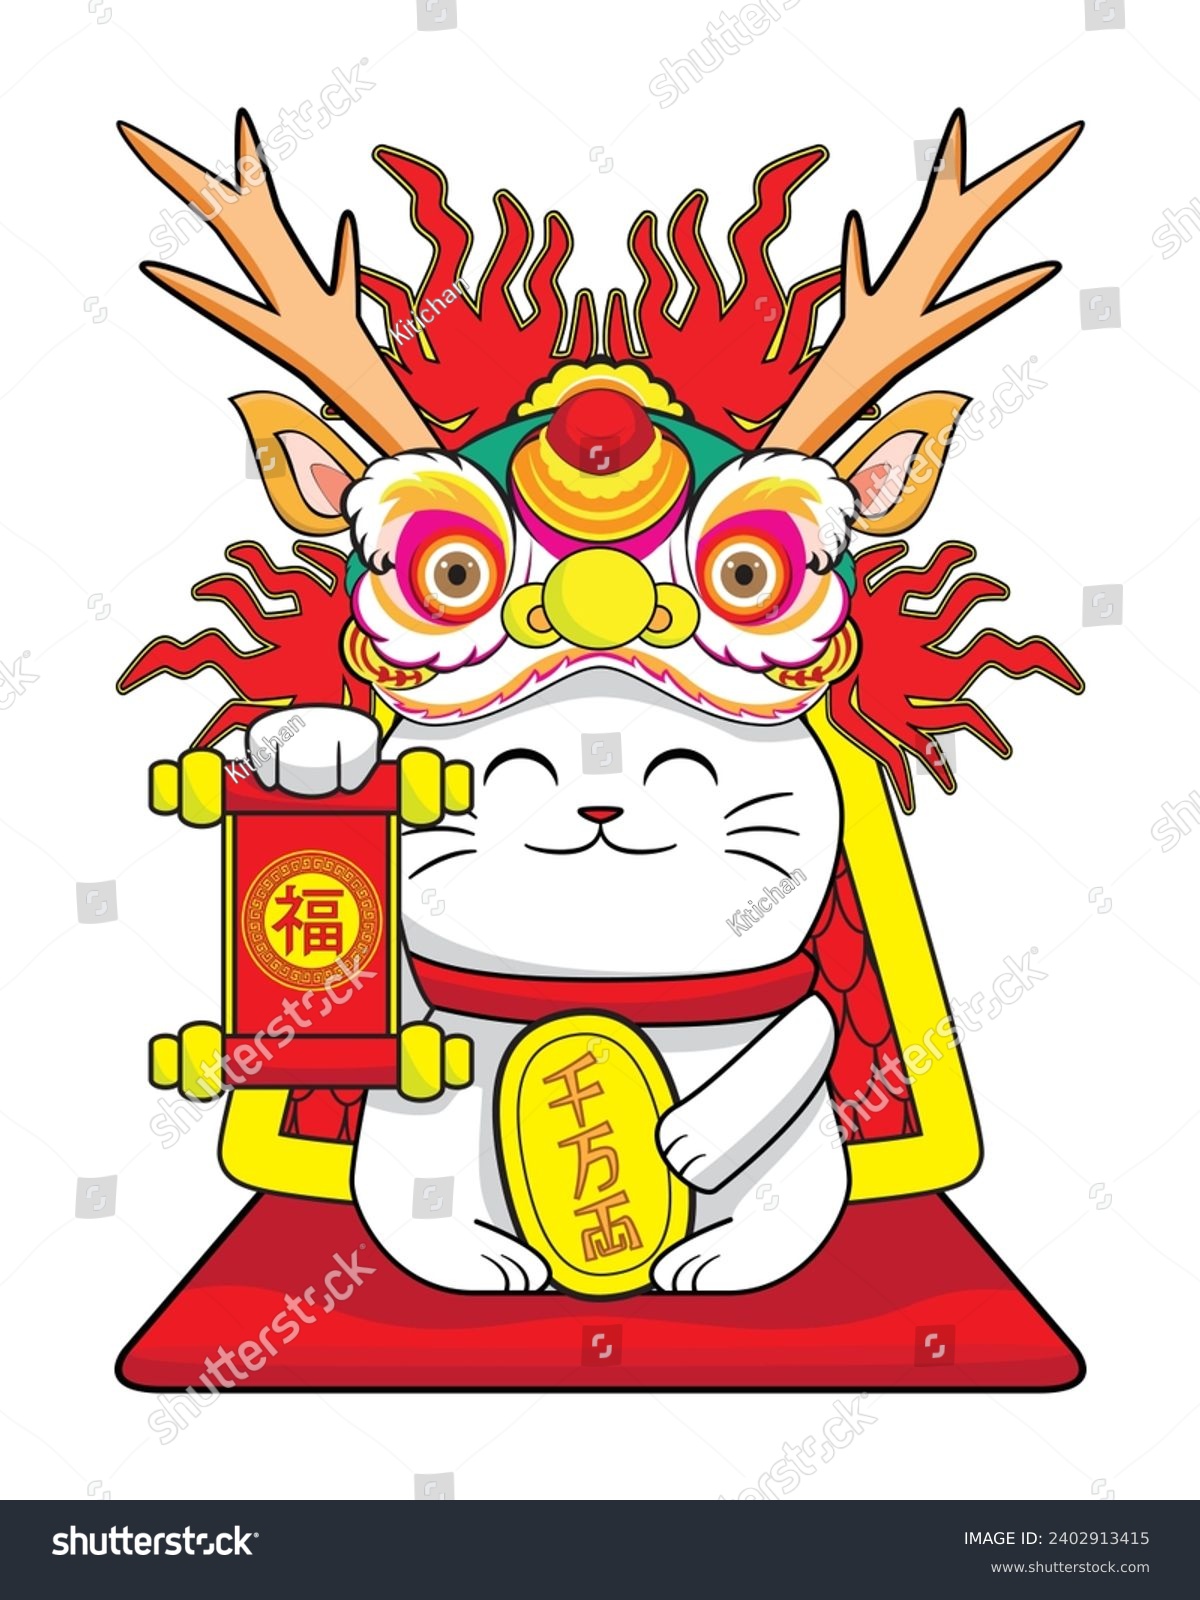 SVG of Cute Japanese lucky cat name Maneki Neko with dragon hat holding gold plate Japanese text meaning 10000000 ryo Japan coins each hand holding Japanese  svg